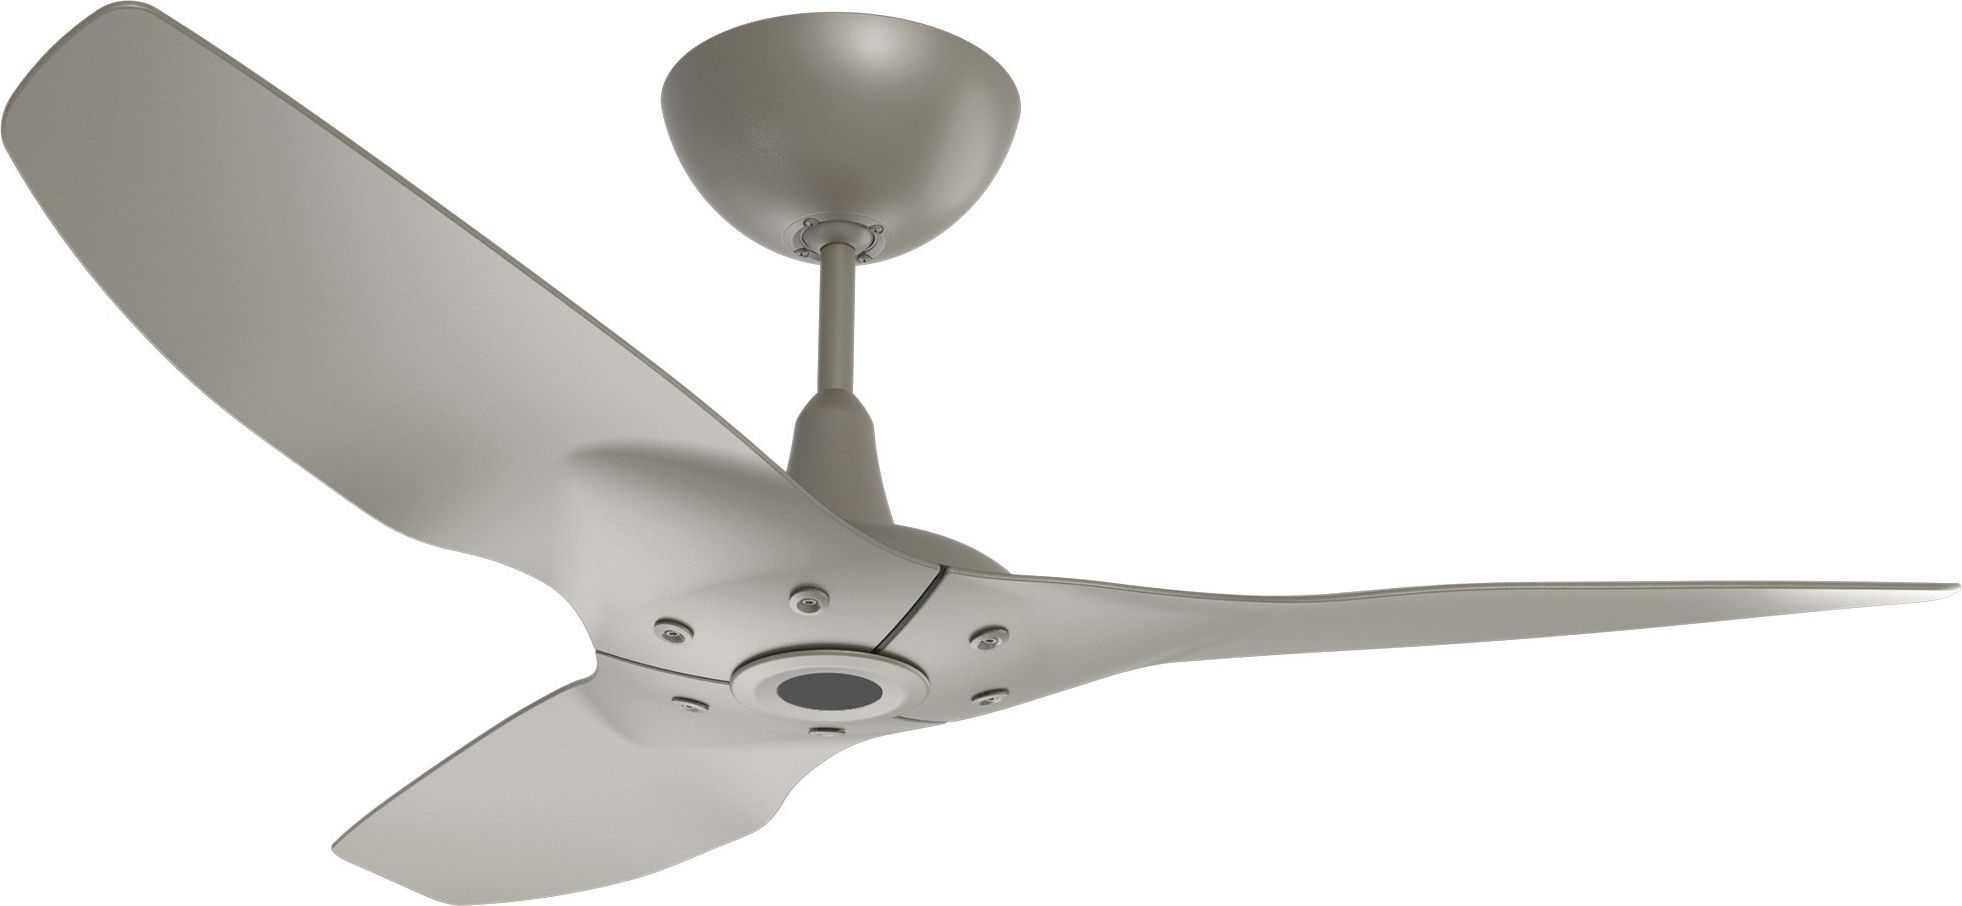 Haiku Outdoor Ceiling Fan: 52", Satin Nickel Full Appearance Intended For Well Known Nickel Outdoor Ceiling Fans (View 12 of 20)